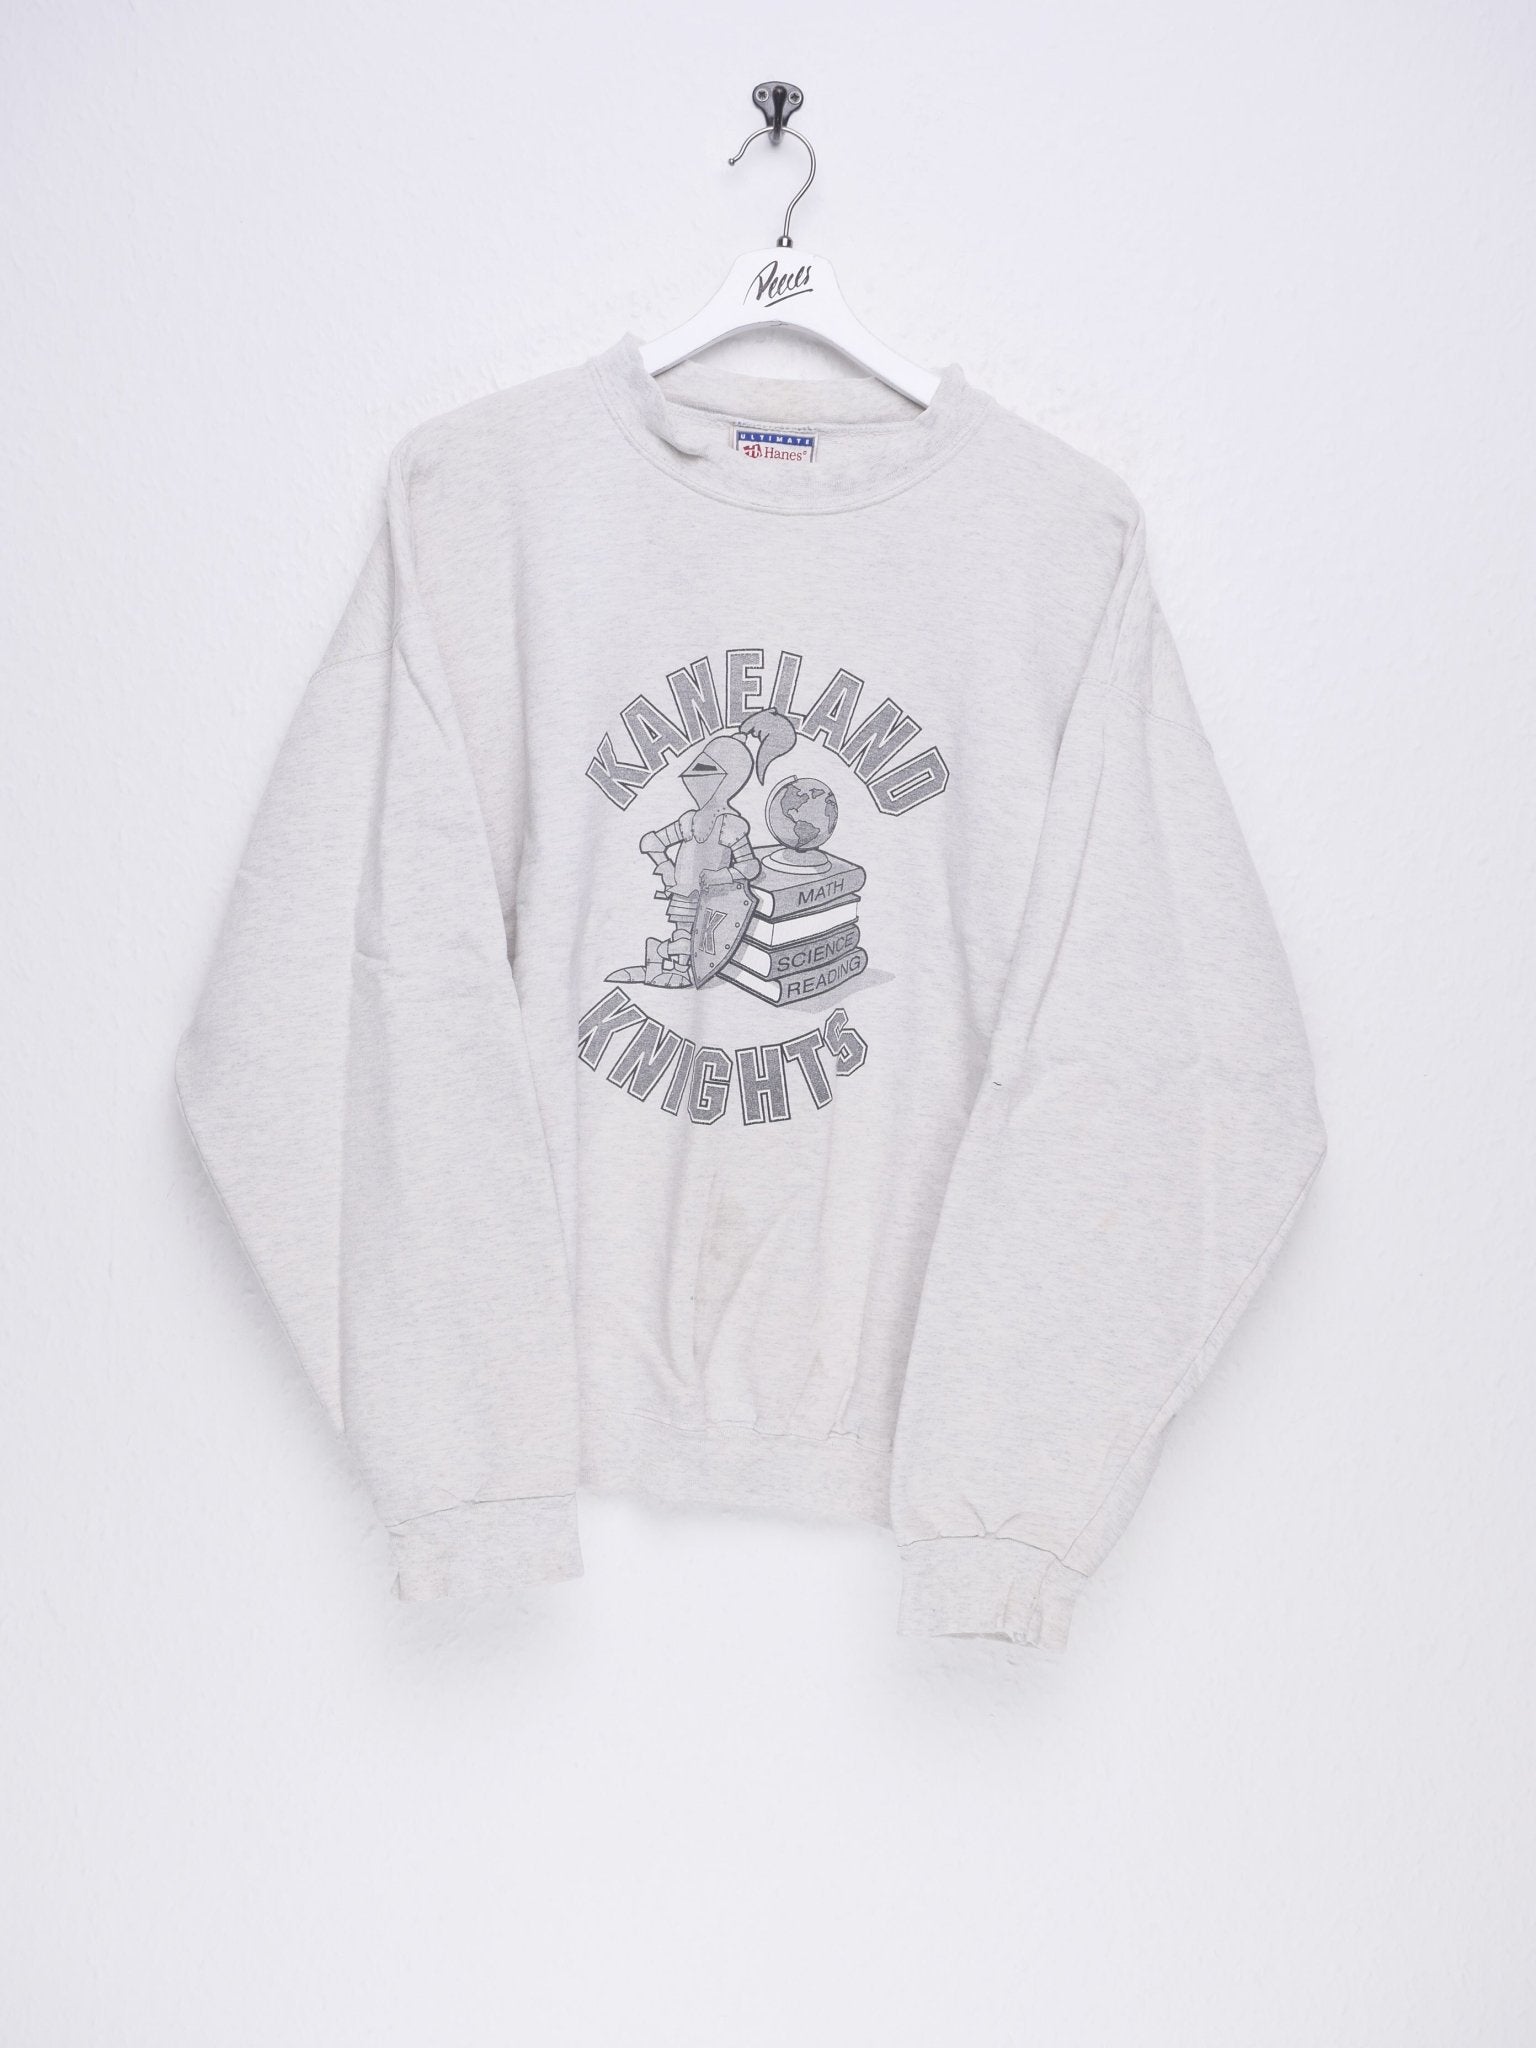 printed Kaneland Knights Graphic grey Sweater - Peeces